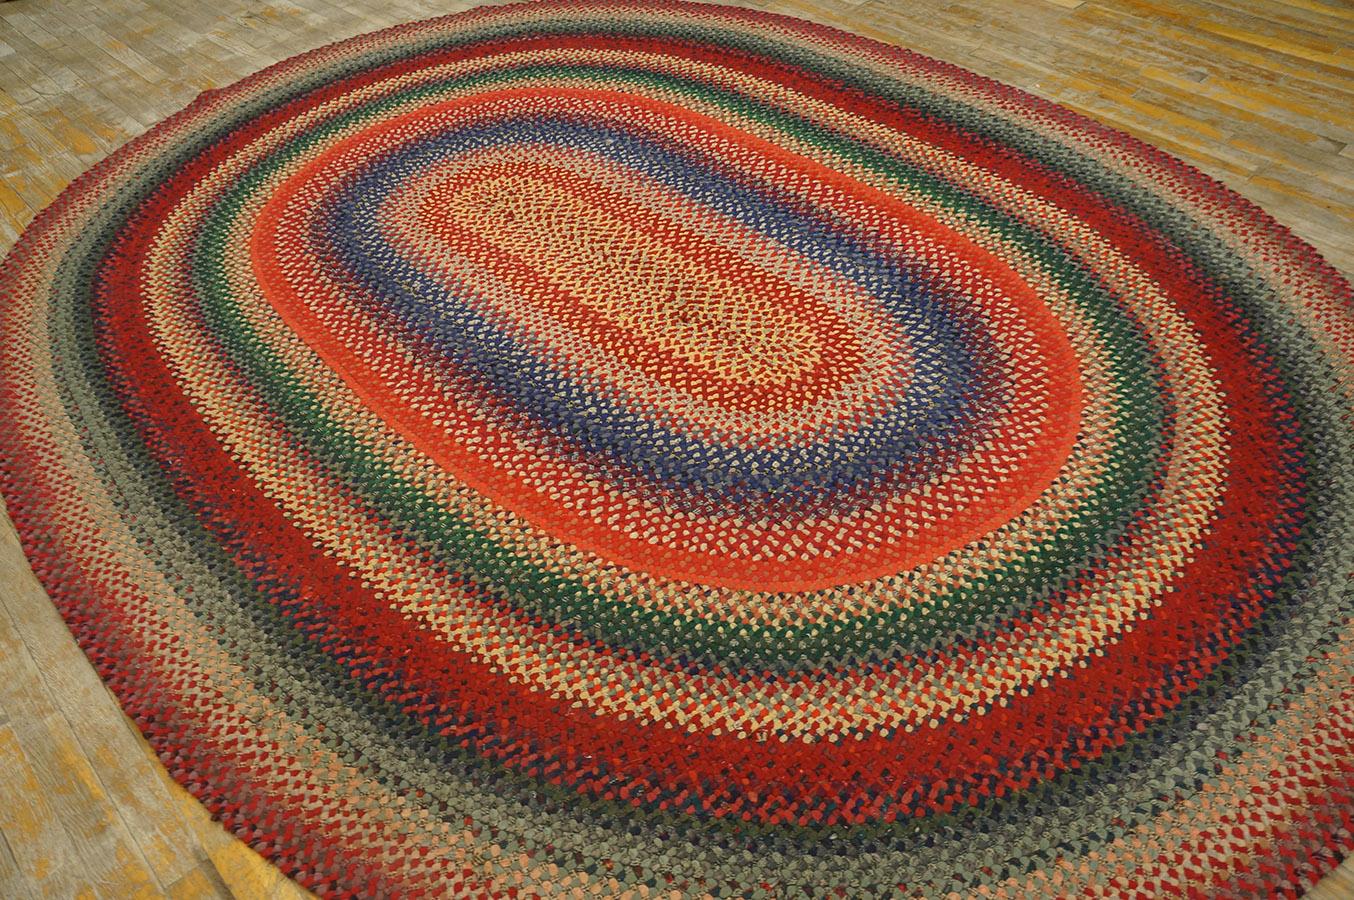 Hand-Woven Early 20th Century Oval American Braided Rug ( 6'10